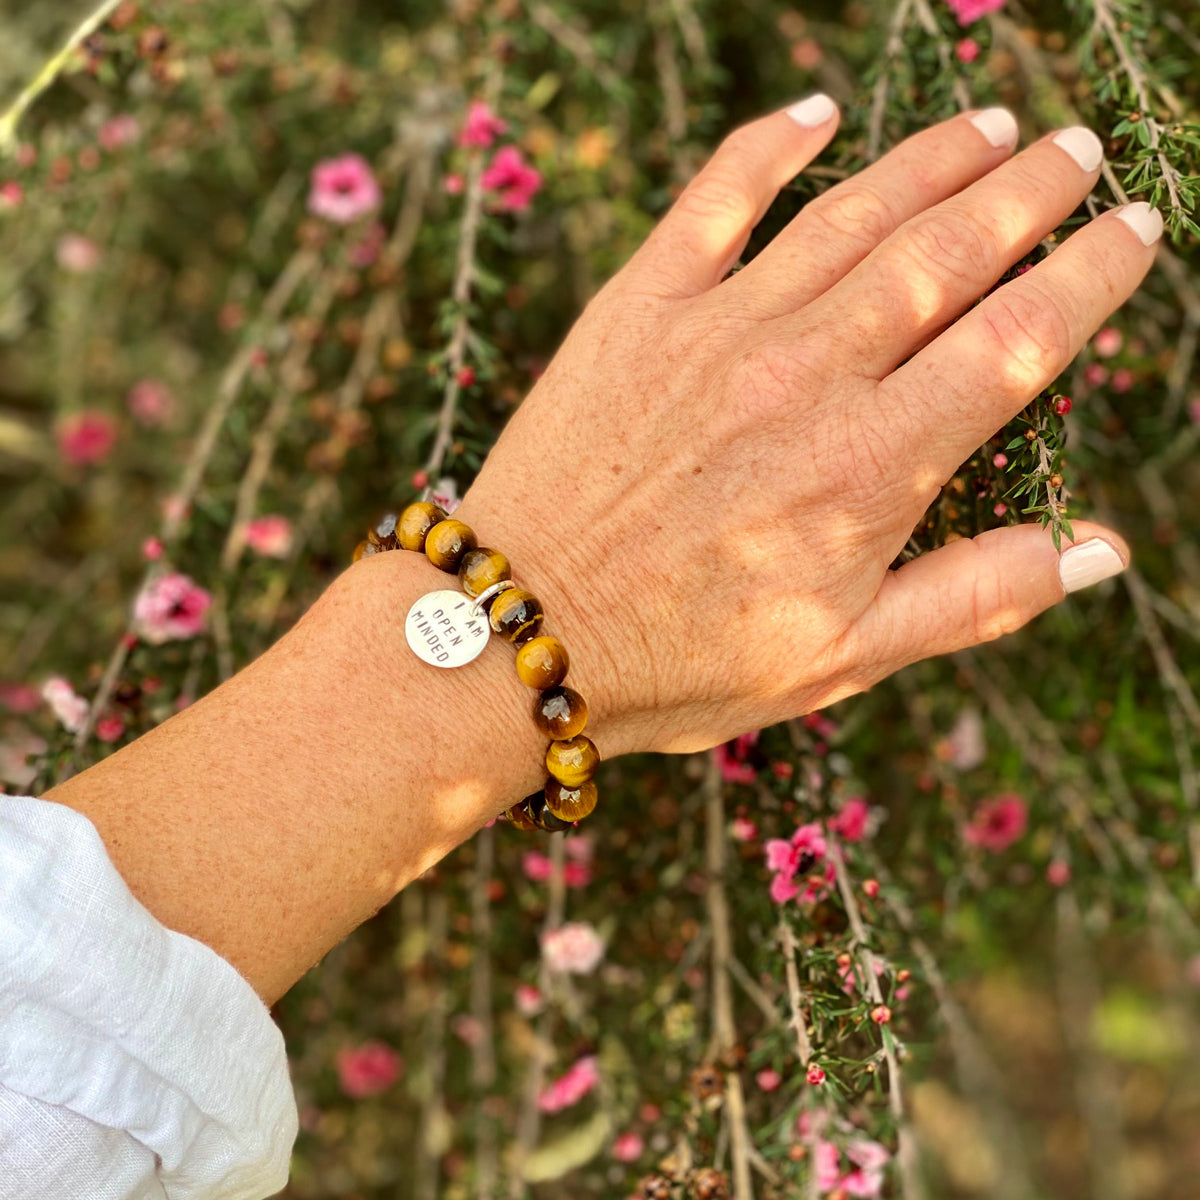 I am Open Minded Affirmation Bracelet with Tiger Eye to See Both Sides of an Argument. There are many ways to see the same situation. Rather than automatically searching for flaws, open your mind (and heart) and seek out the positive aspects of what's going on, or at least another perspective. 